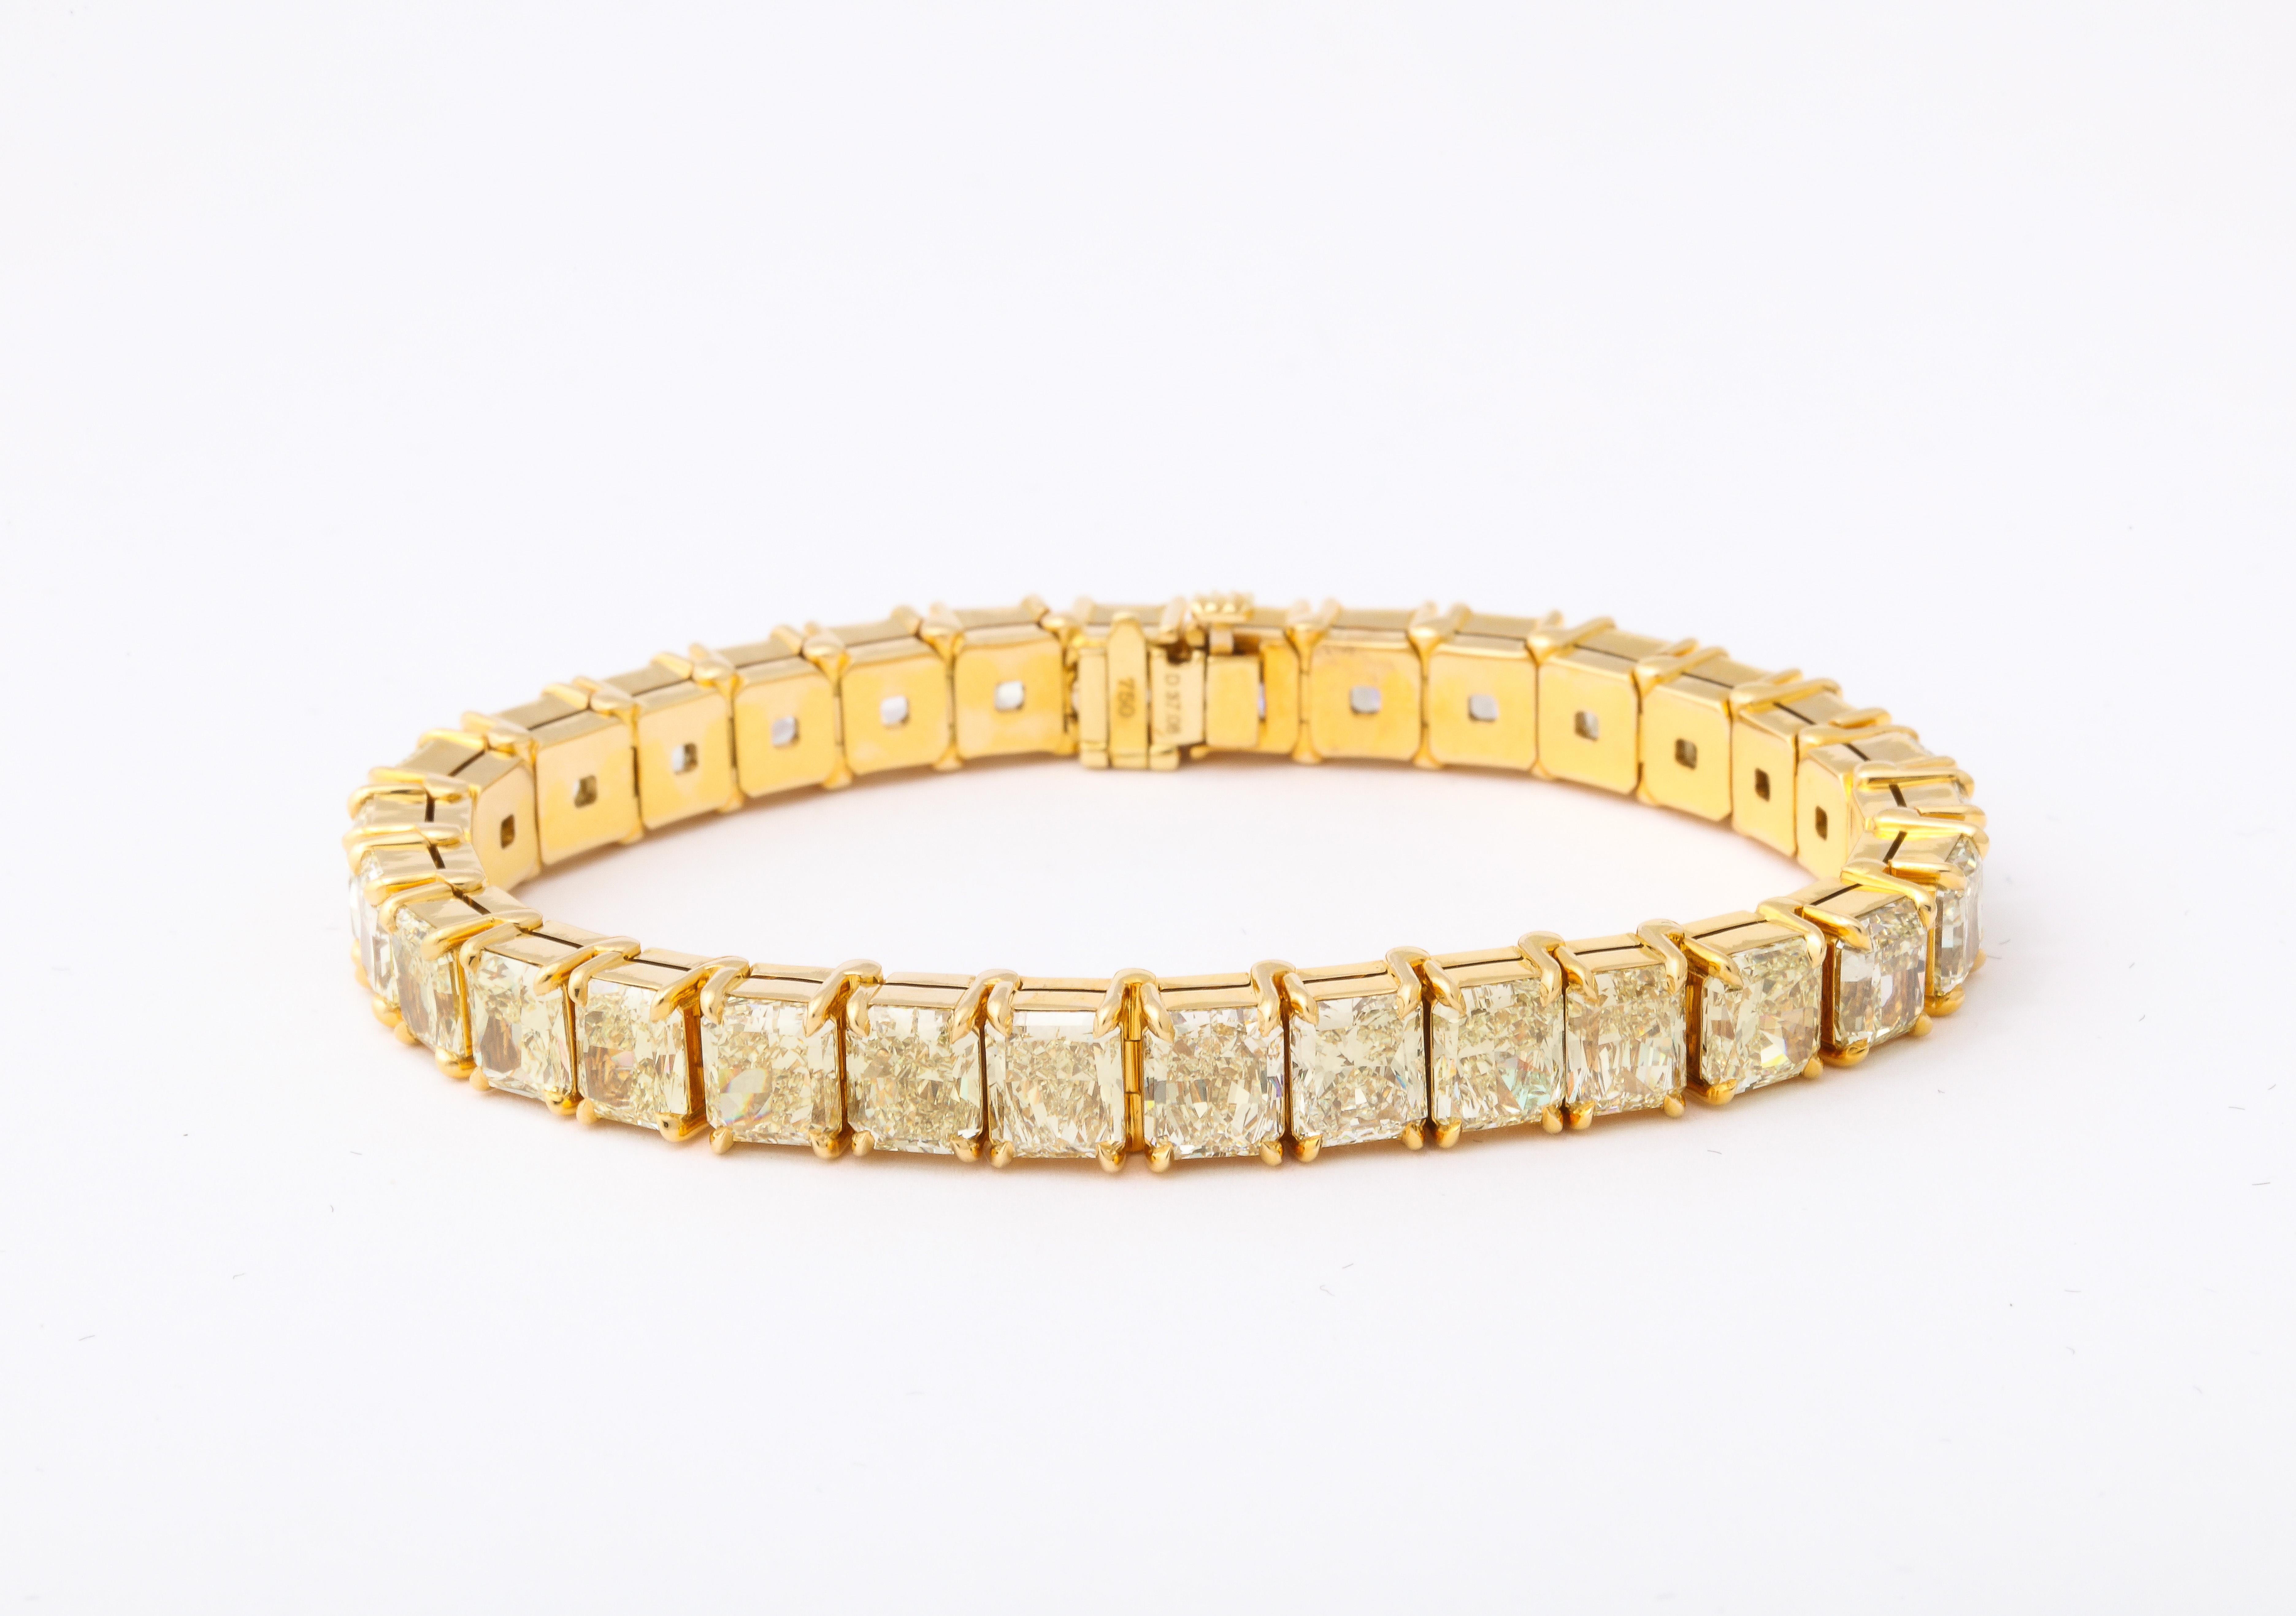 
A SPECTACULAR bracelet! 

37.08 carats of Yellow, Radiant cut diamonds set in 18k yellow gold. 

30 total diamonds - each stone averages over 1 carat! 

7 inch length 

7.8 mm at its widest point.  